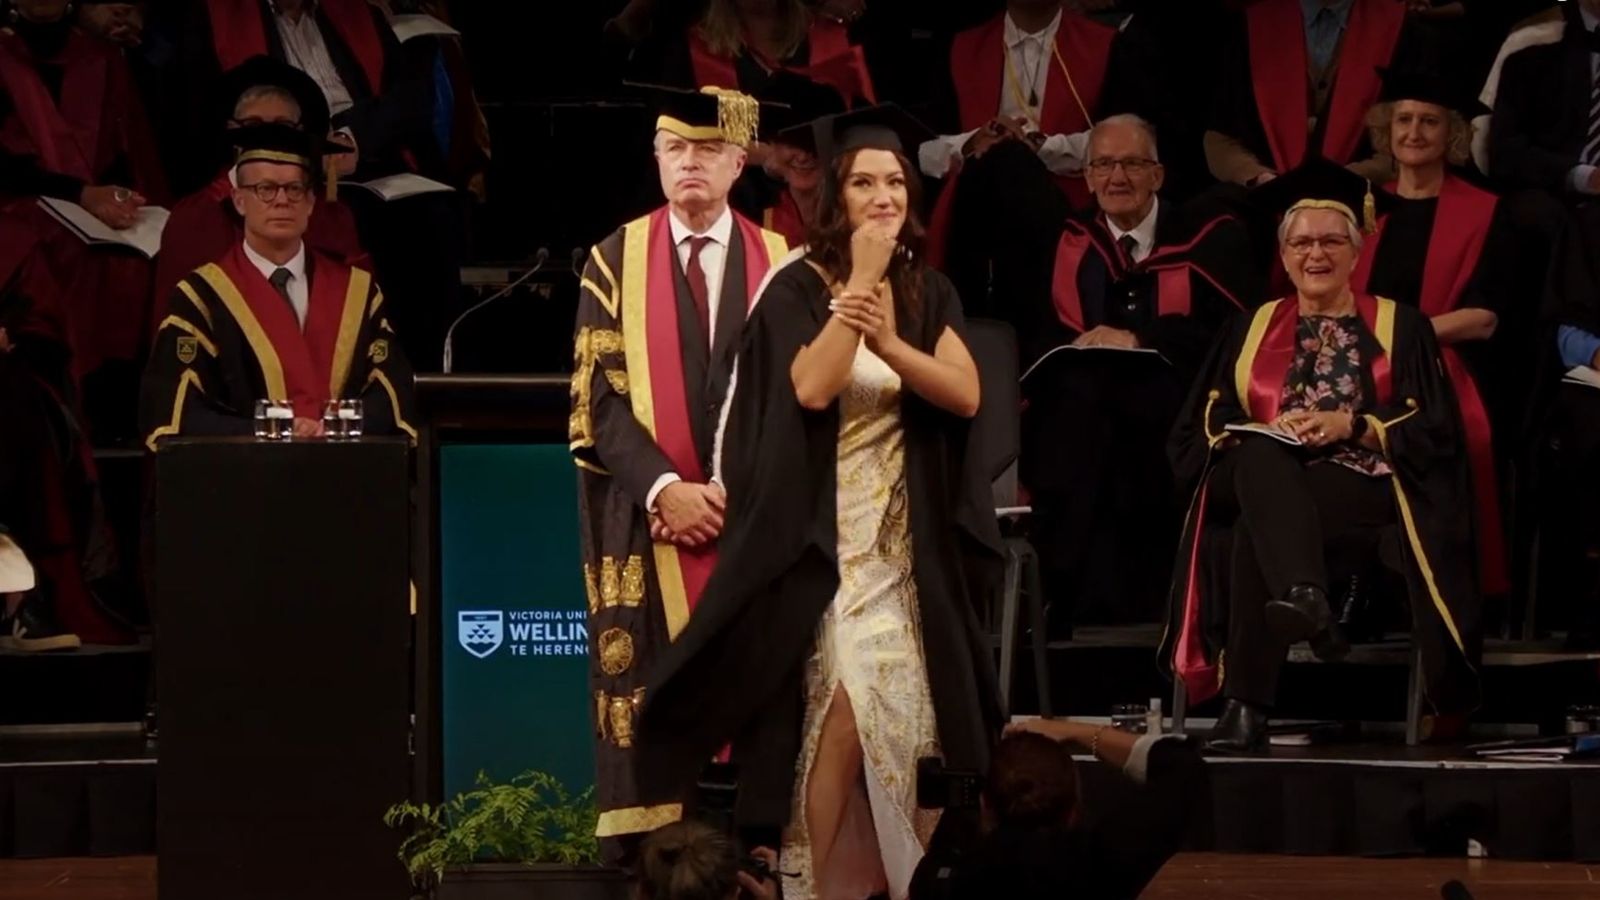 A woman dancing on stage after graduating.